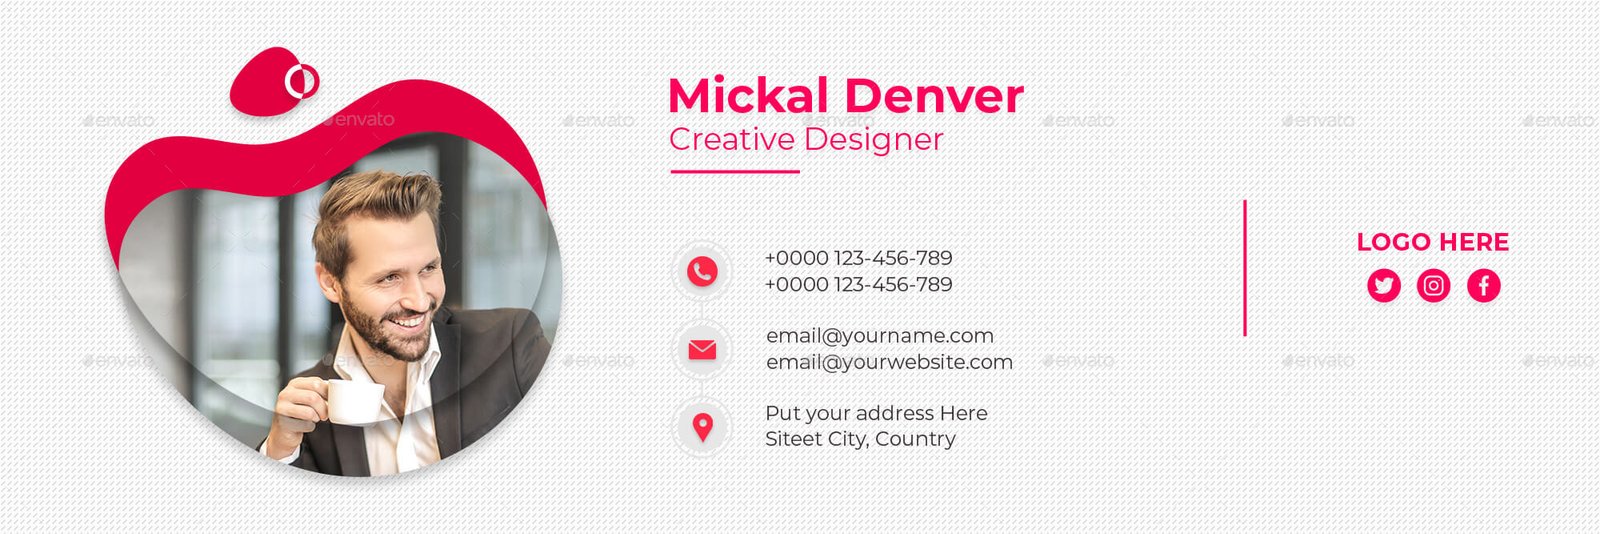 Business Email Signatures Template